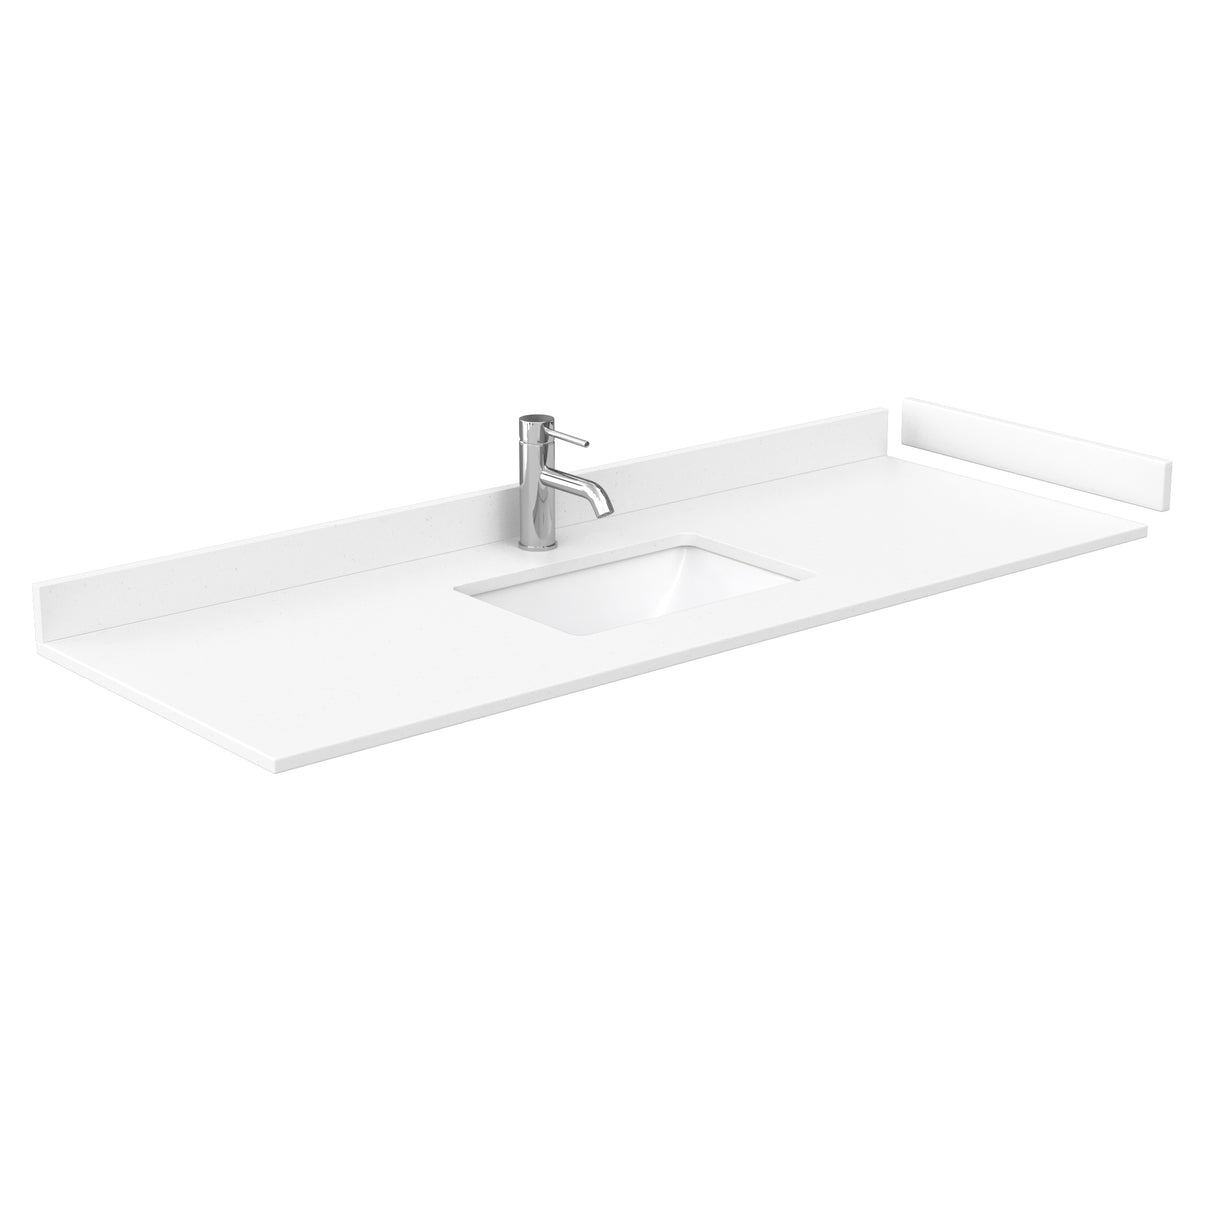 Sheffield 60 Inch Single Bathroom Vanity in Gray White Cultured Marble Countertop Undermount Square Sink No Mirror